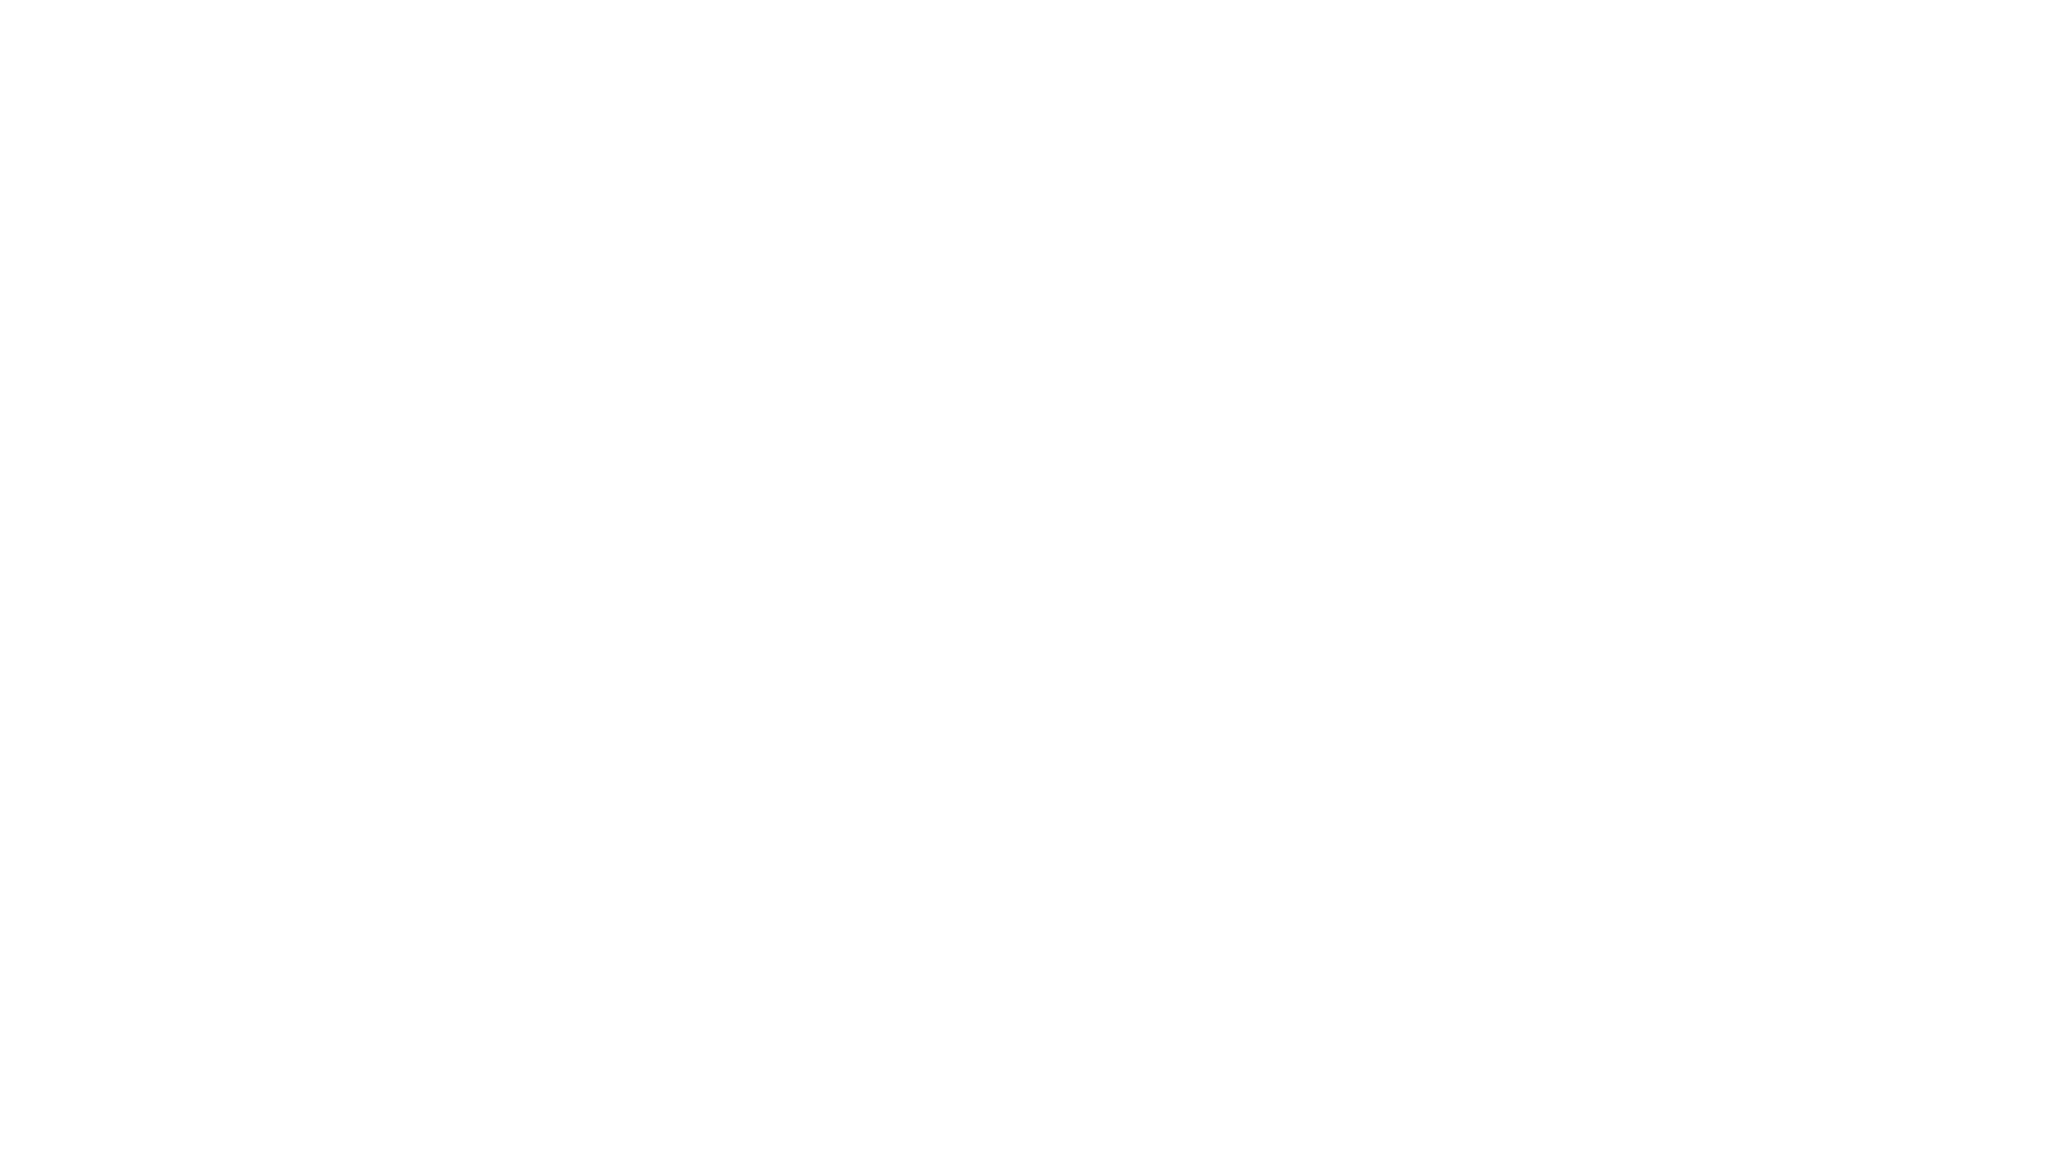 Opera in the Park title